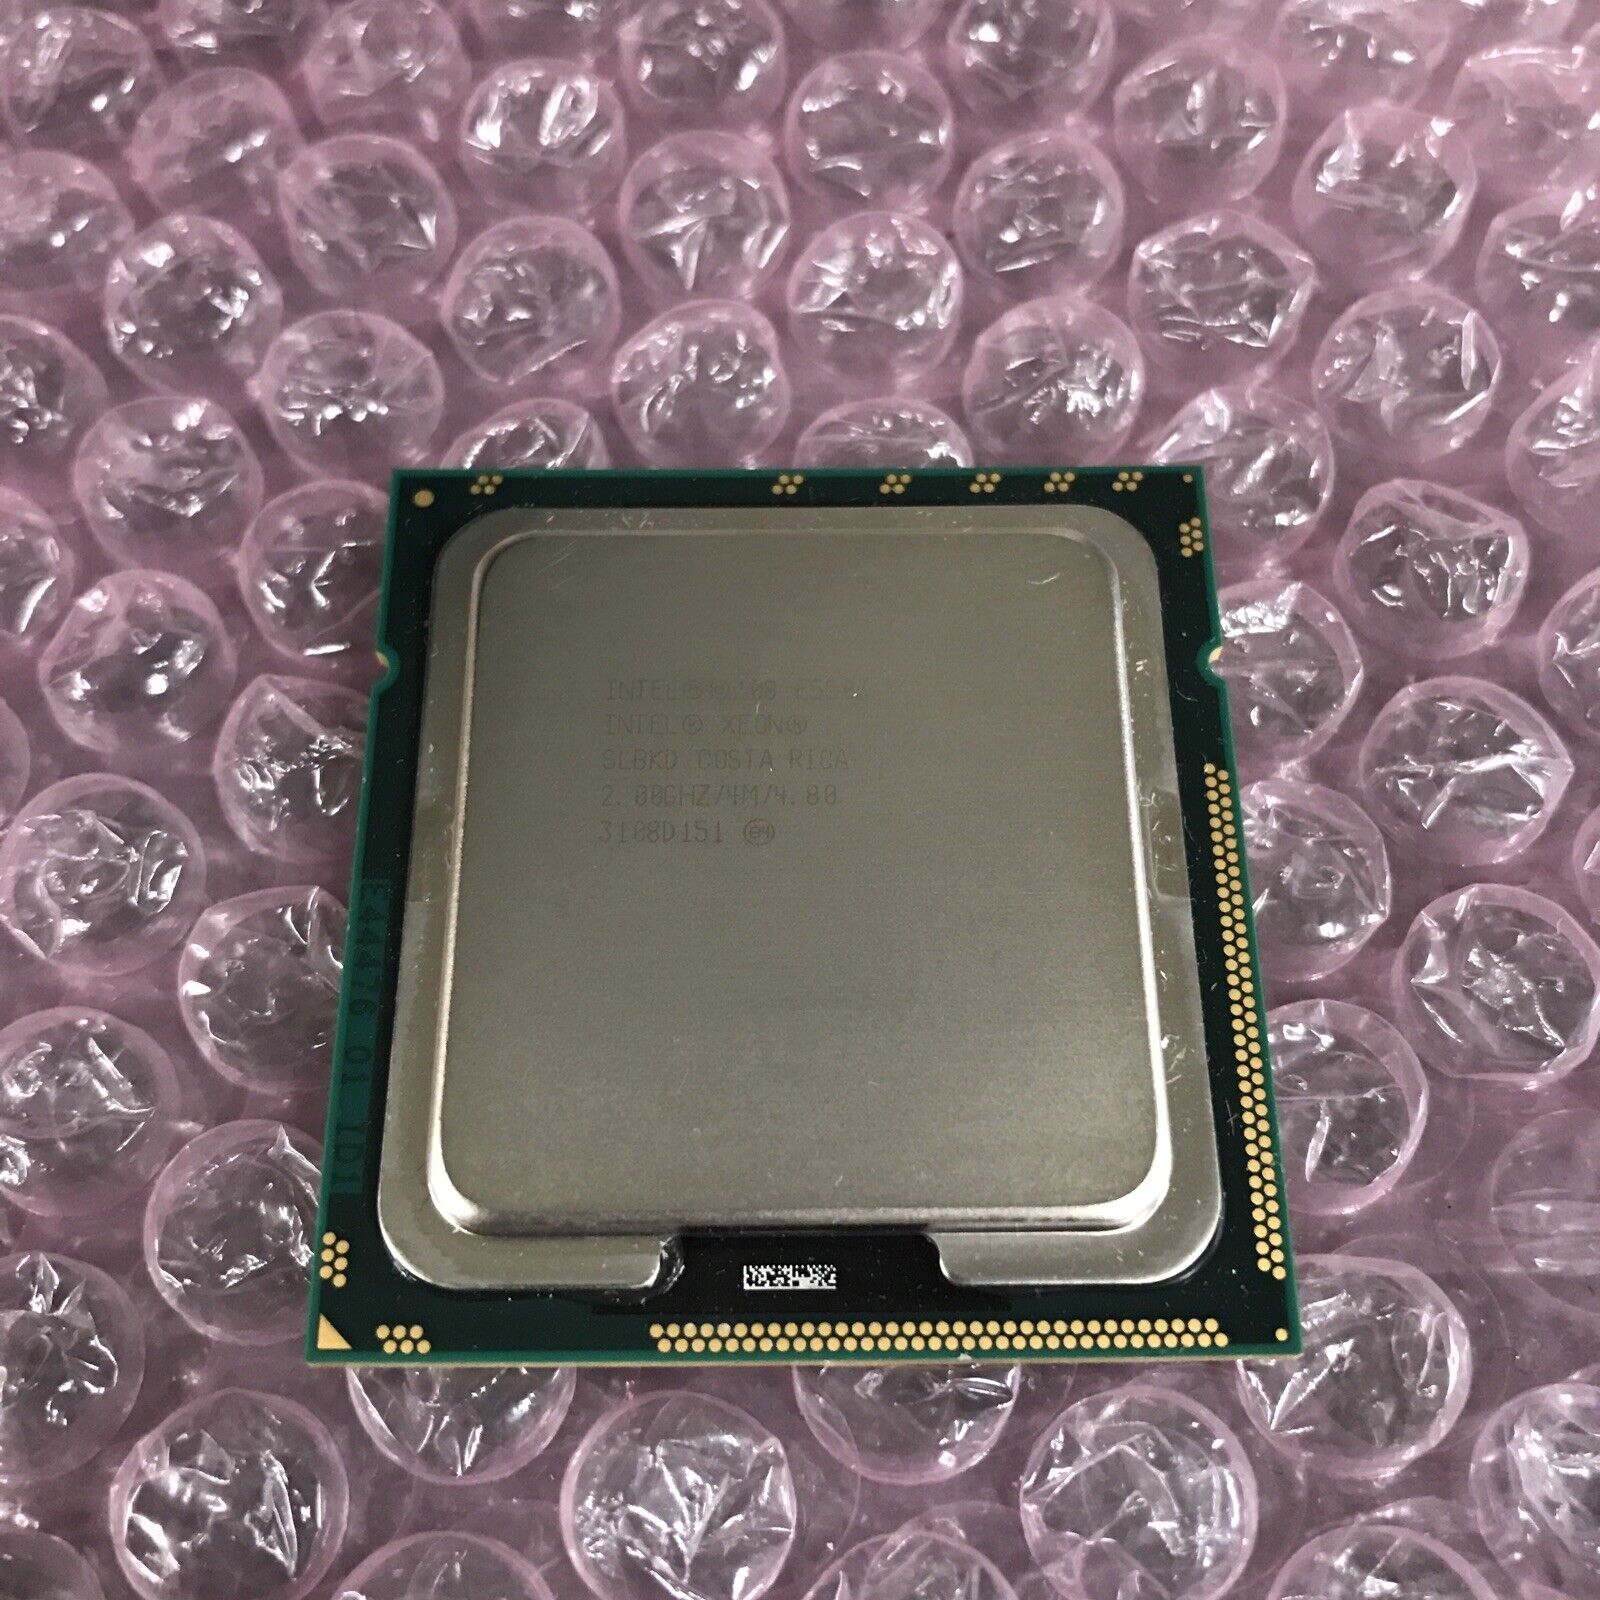 Intel Xeon E5503 SLBKD 2.00GHZ (Tested and Working)